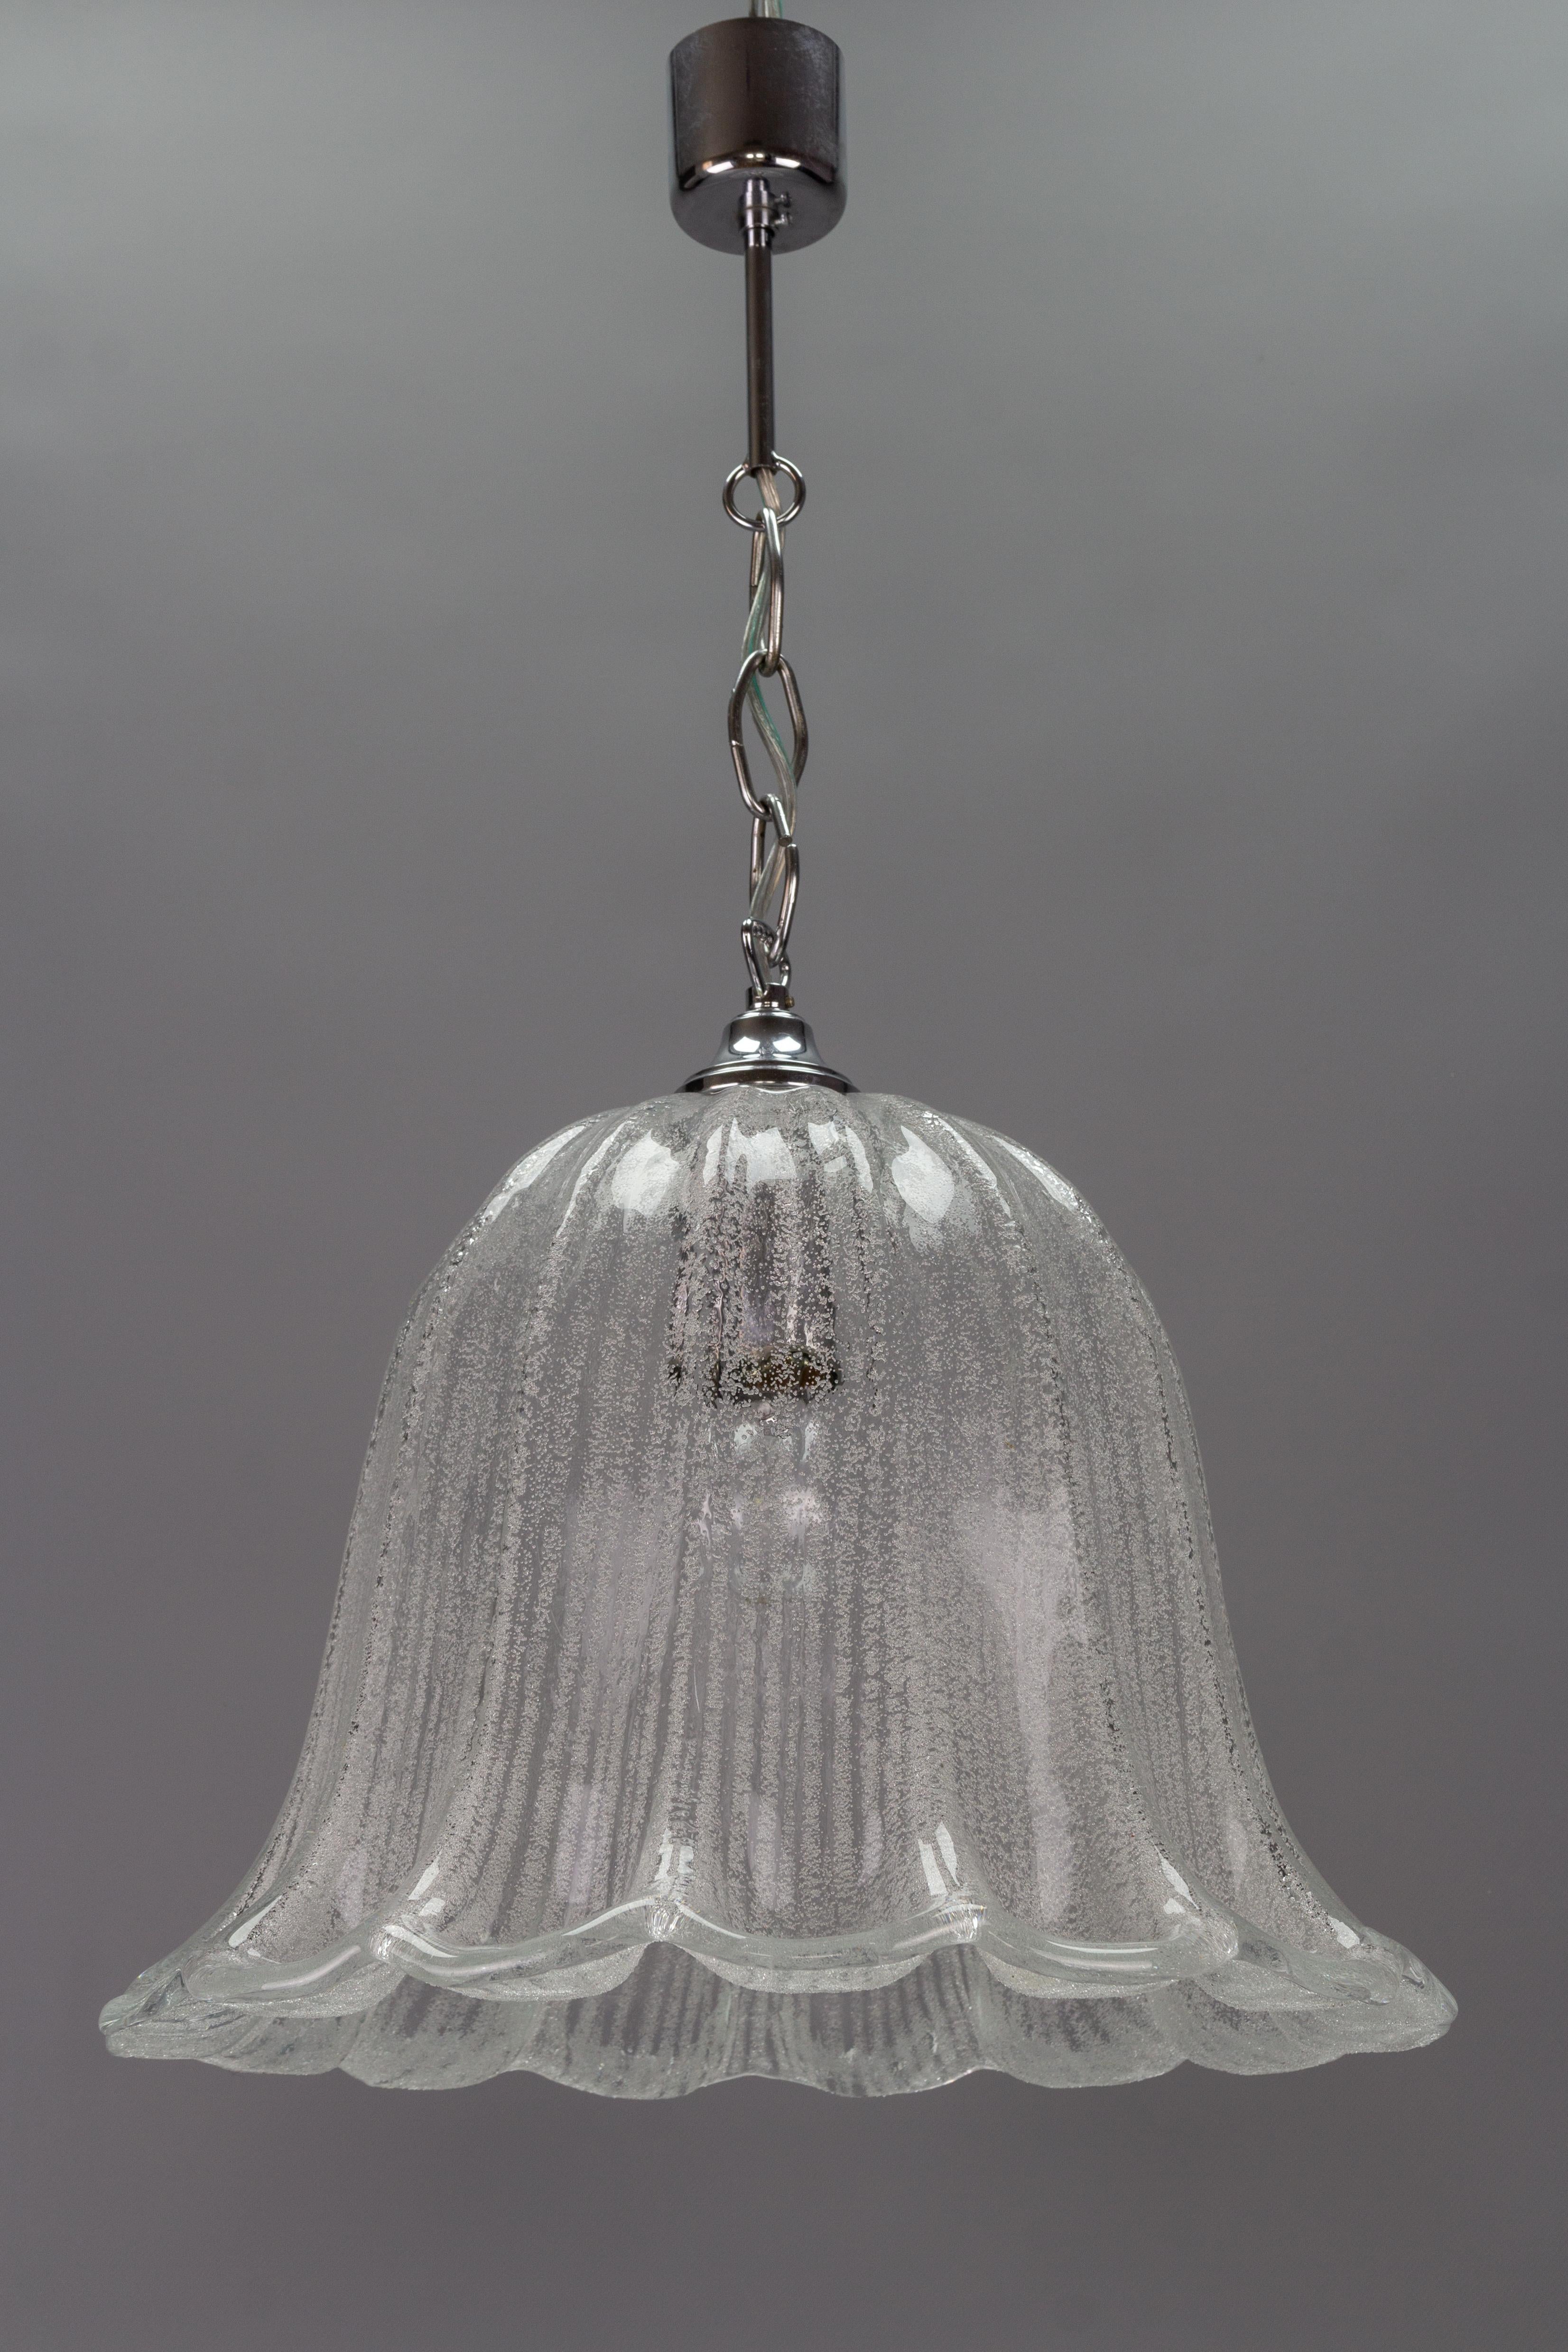 An elegant Mid-Century Modern pendant light fixture with a beautifully shaped ice glass shade and chrome-plated metal fitting. Made in Germany, circa the 1970s by Hustadt - Leuchten.
One socket for E27 (E26) light bulb.
Dimensions: height: 70 cm /